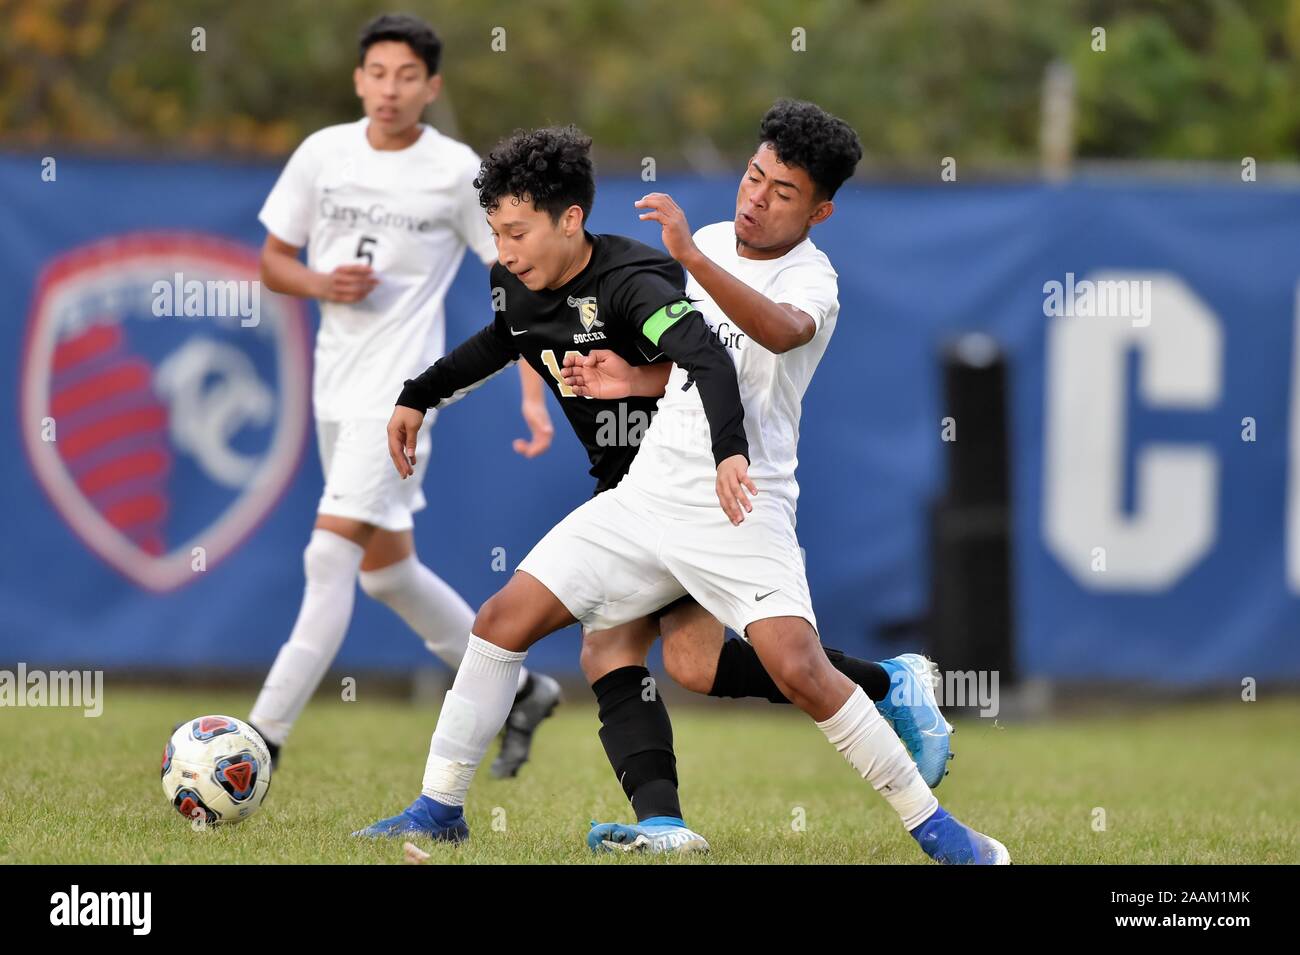 Opposing players battle for possession of the ball. USA. Stock Photo